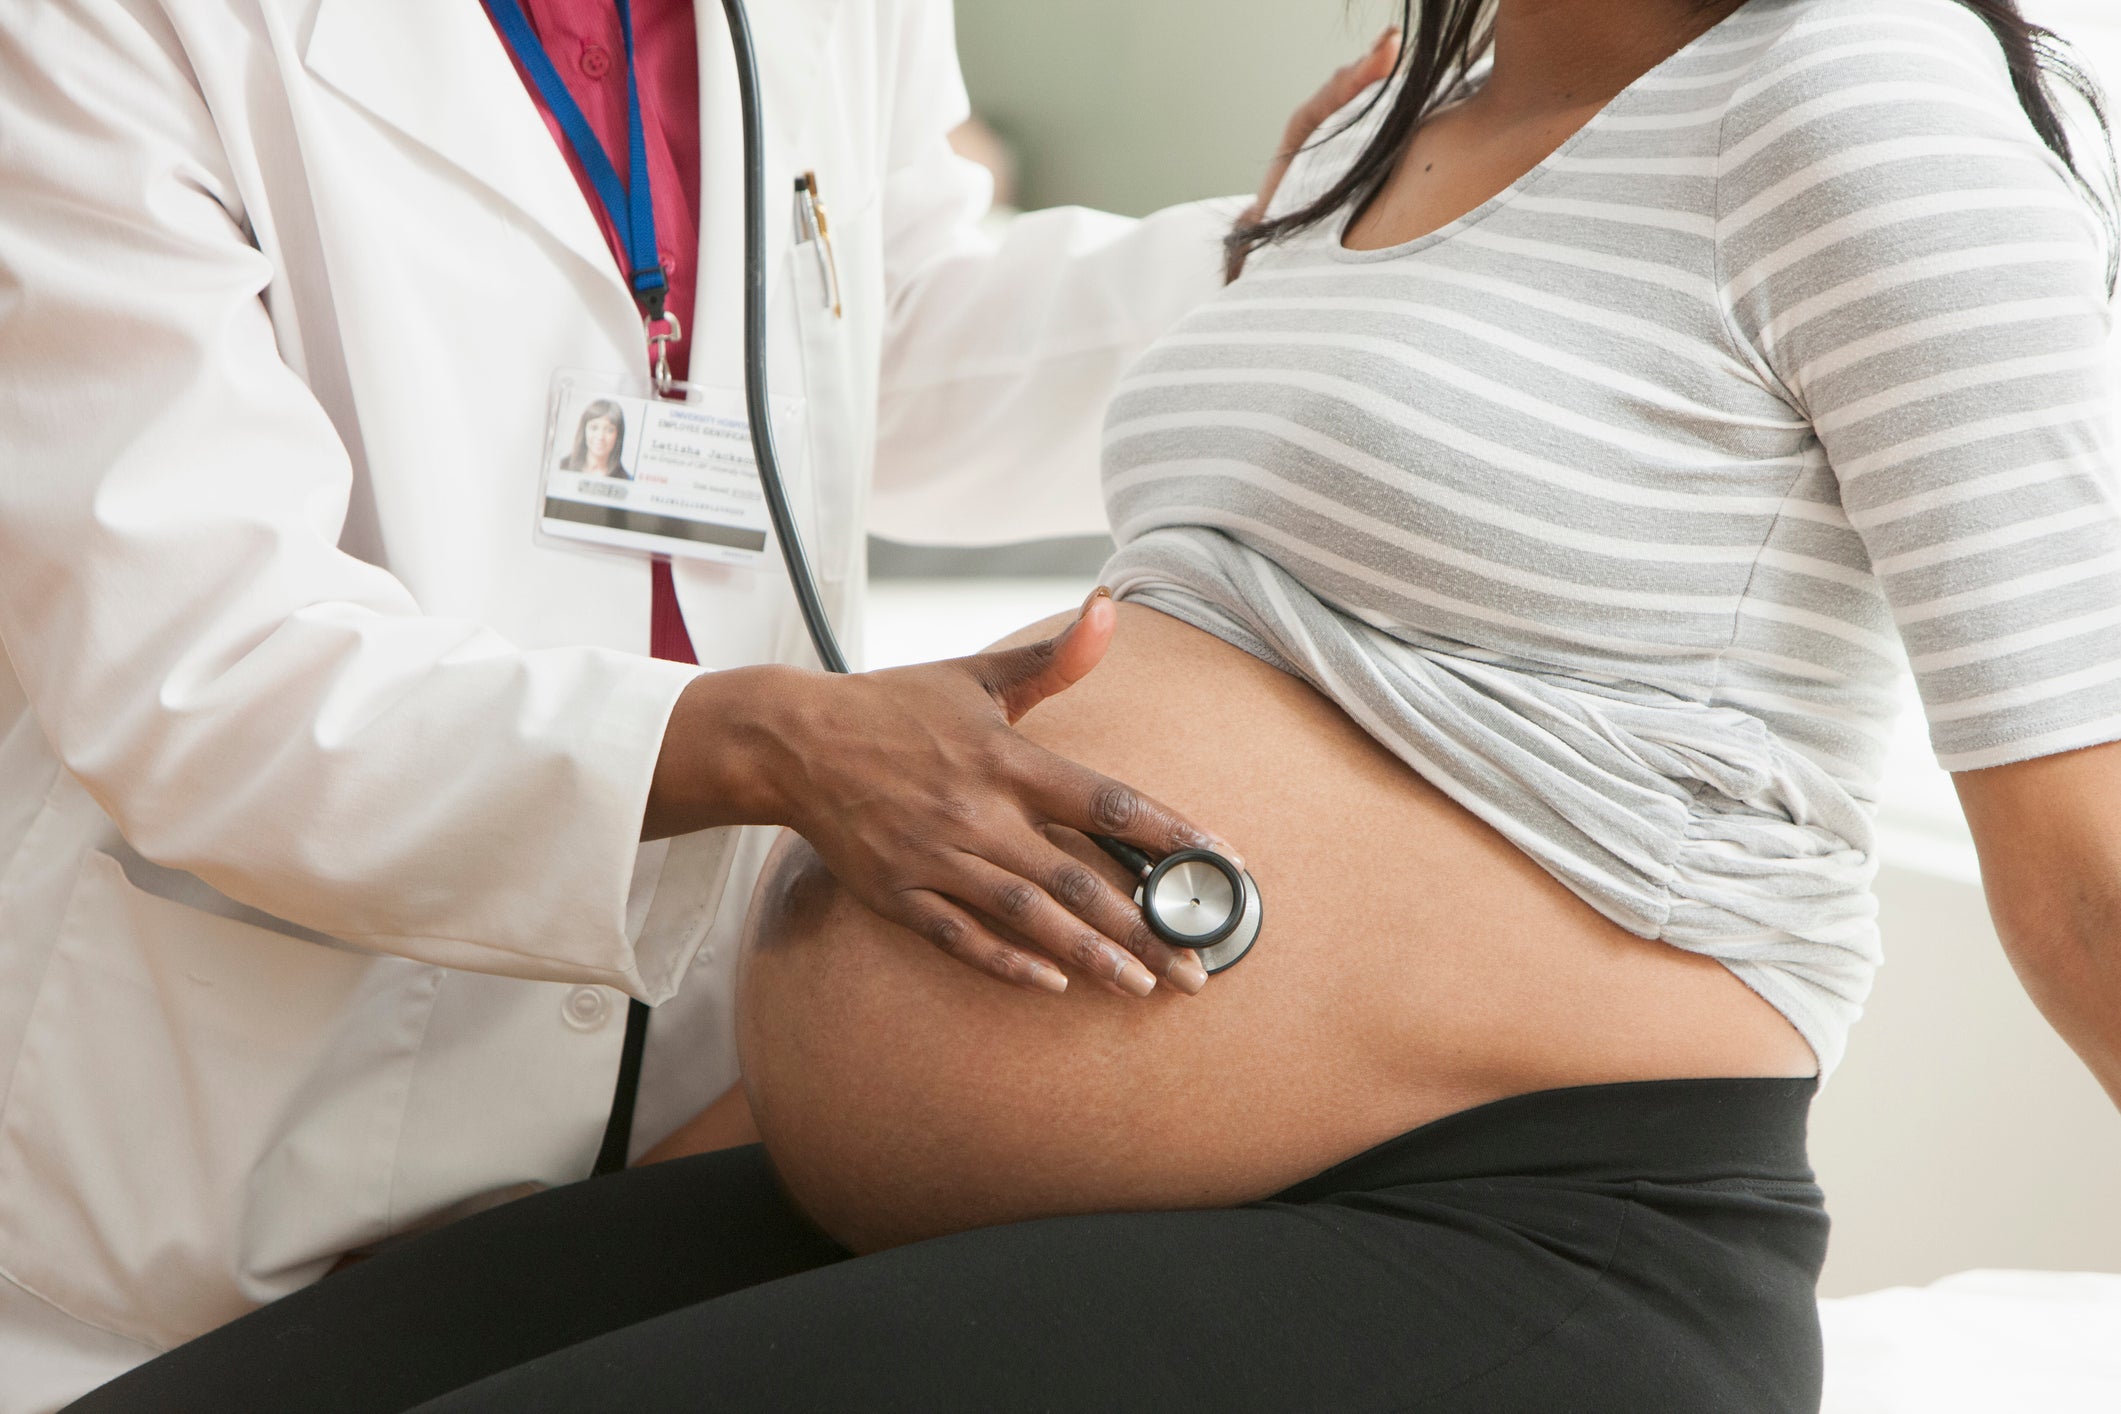 Black Maternal Health Matters: What To Know Before You Give Birth